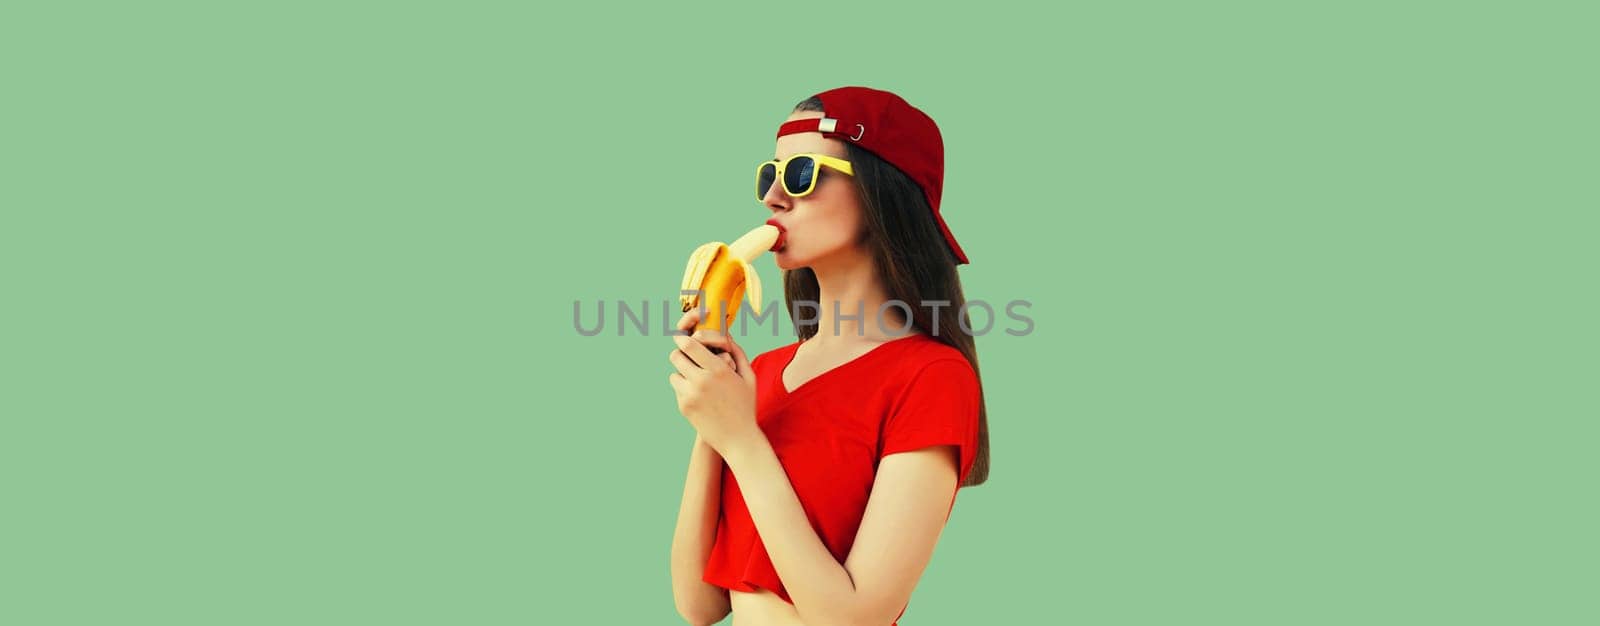 Stylish caucasian young woman eating banana in red baseball cap on green studio background